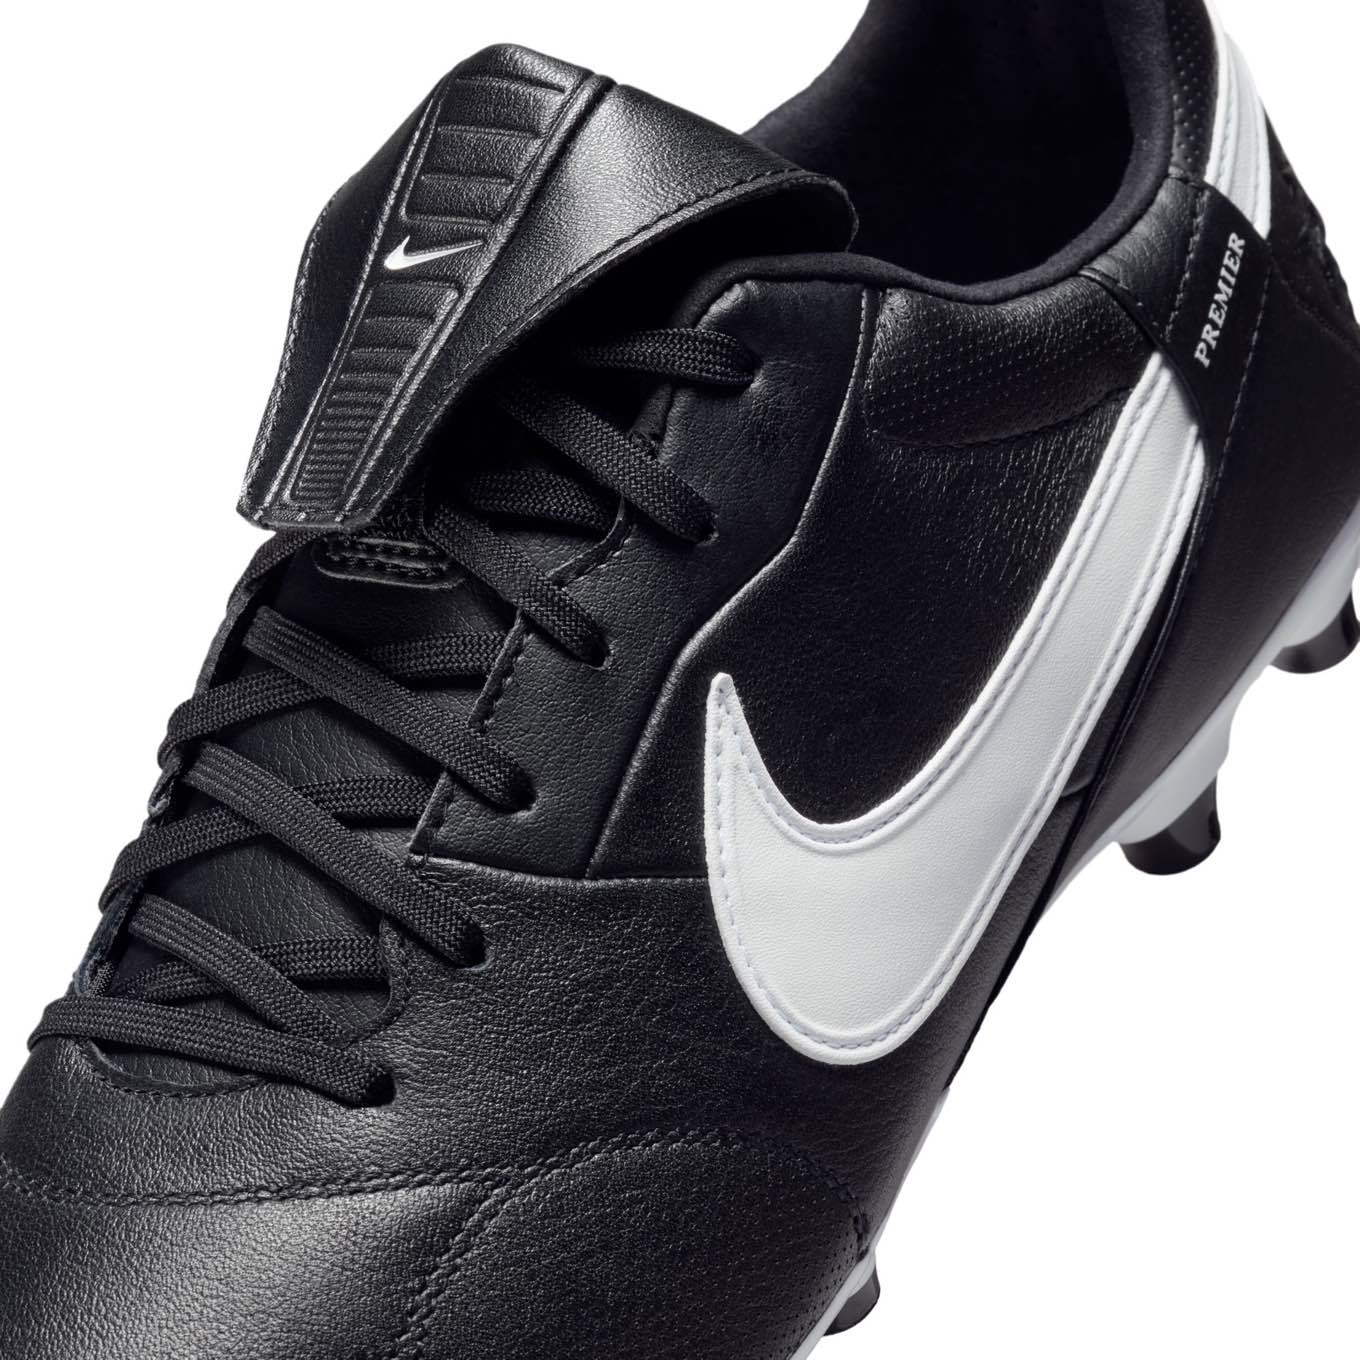 Nike Premier 3 FG Firm-Ground Low-Top Soccer Cleats